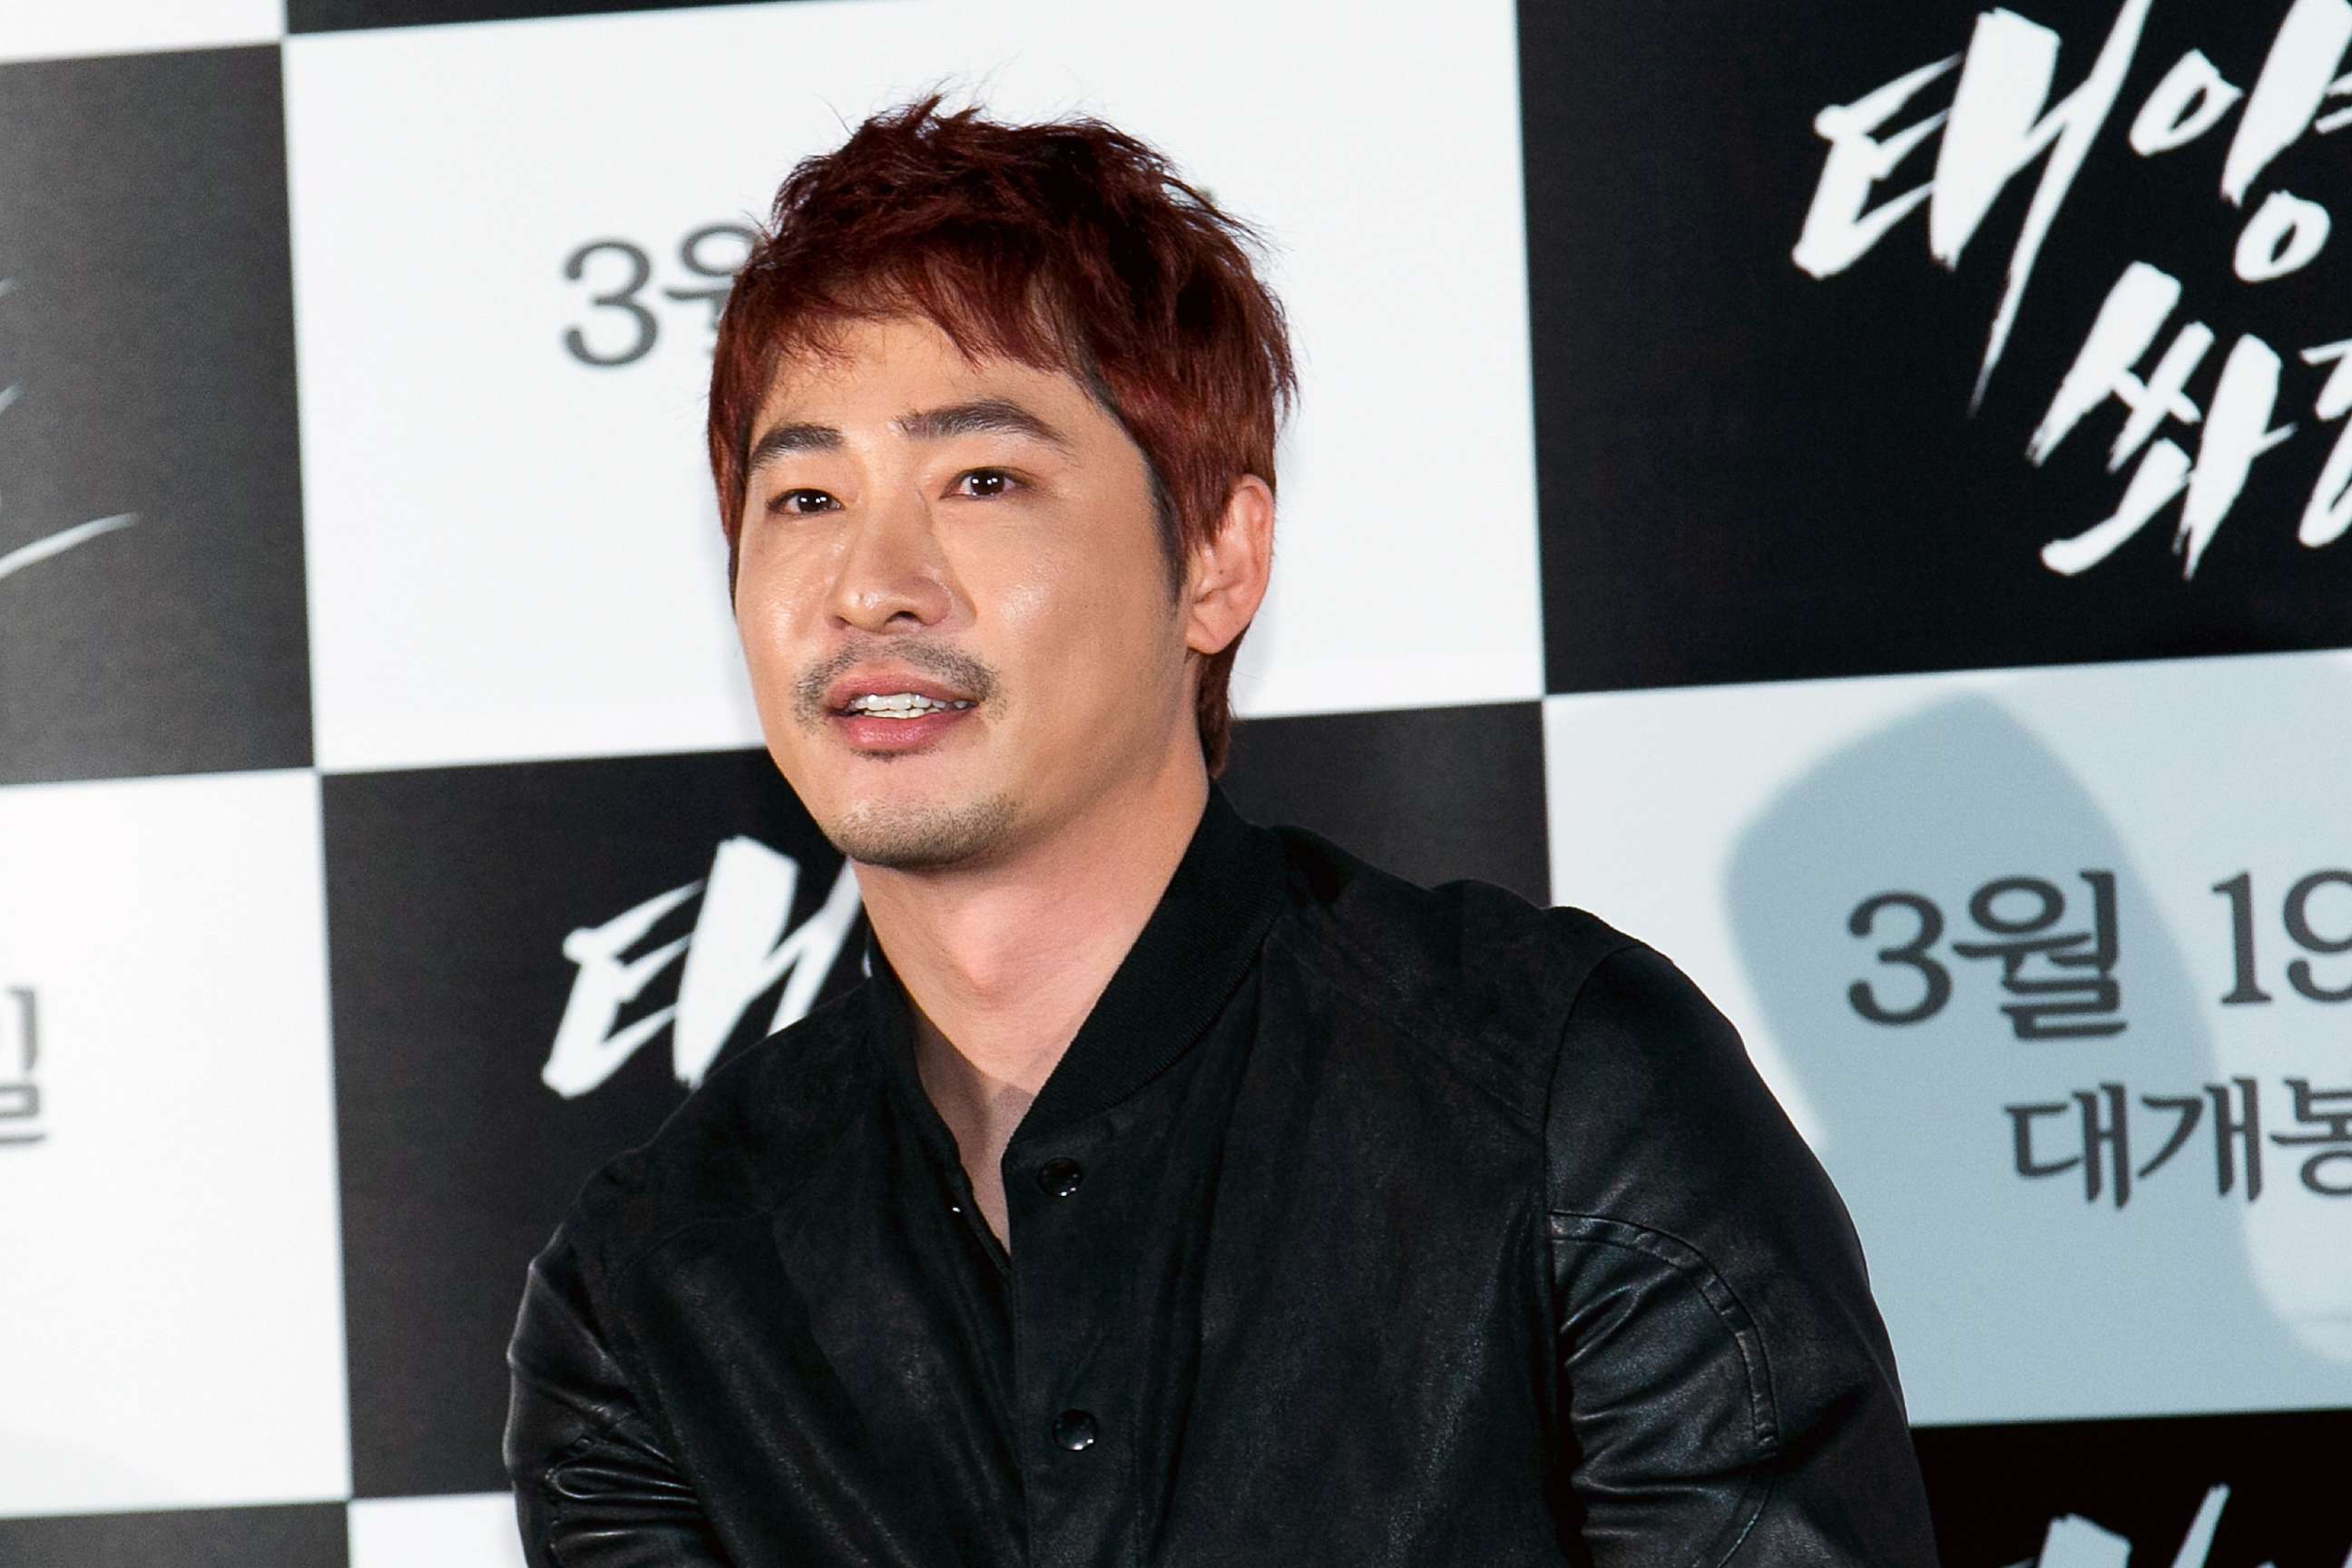 PHOTO: South Korean actor Kang Ji-Hwan attends the press screening for "Shoot The Sun" at Lotte Cinema, March 9, 2015, in Seoul.